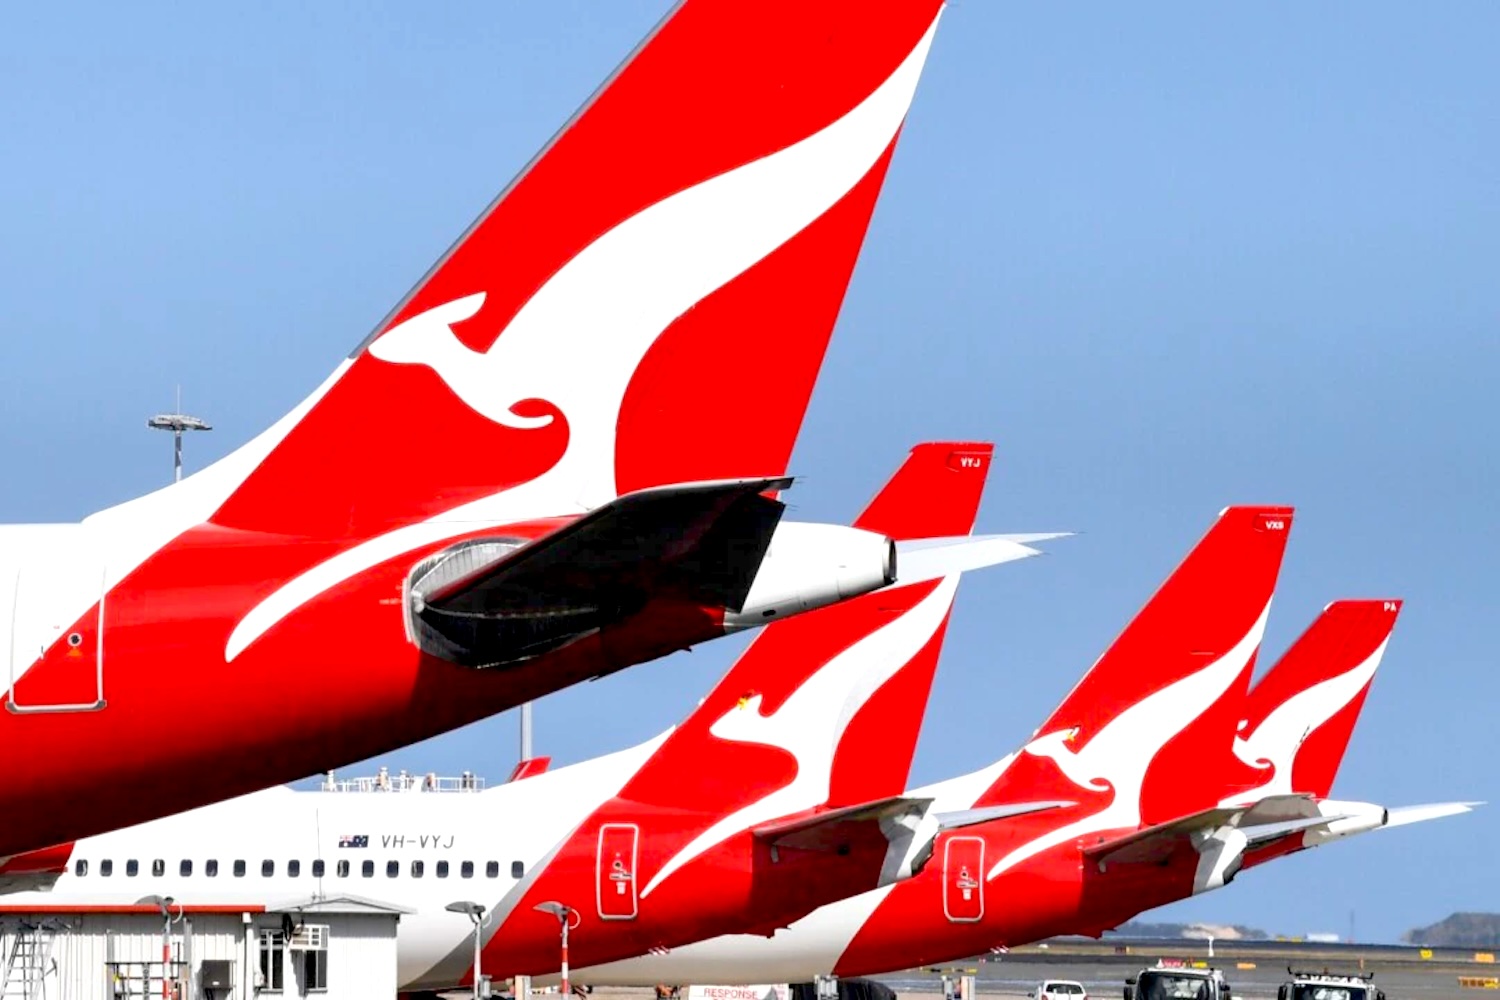 Despite Billions In Profit, Qantas’ ‘Budget Airline Act’ Behaviour Infuriates Its Most Loyal Frequent Flyer Customers